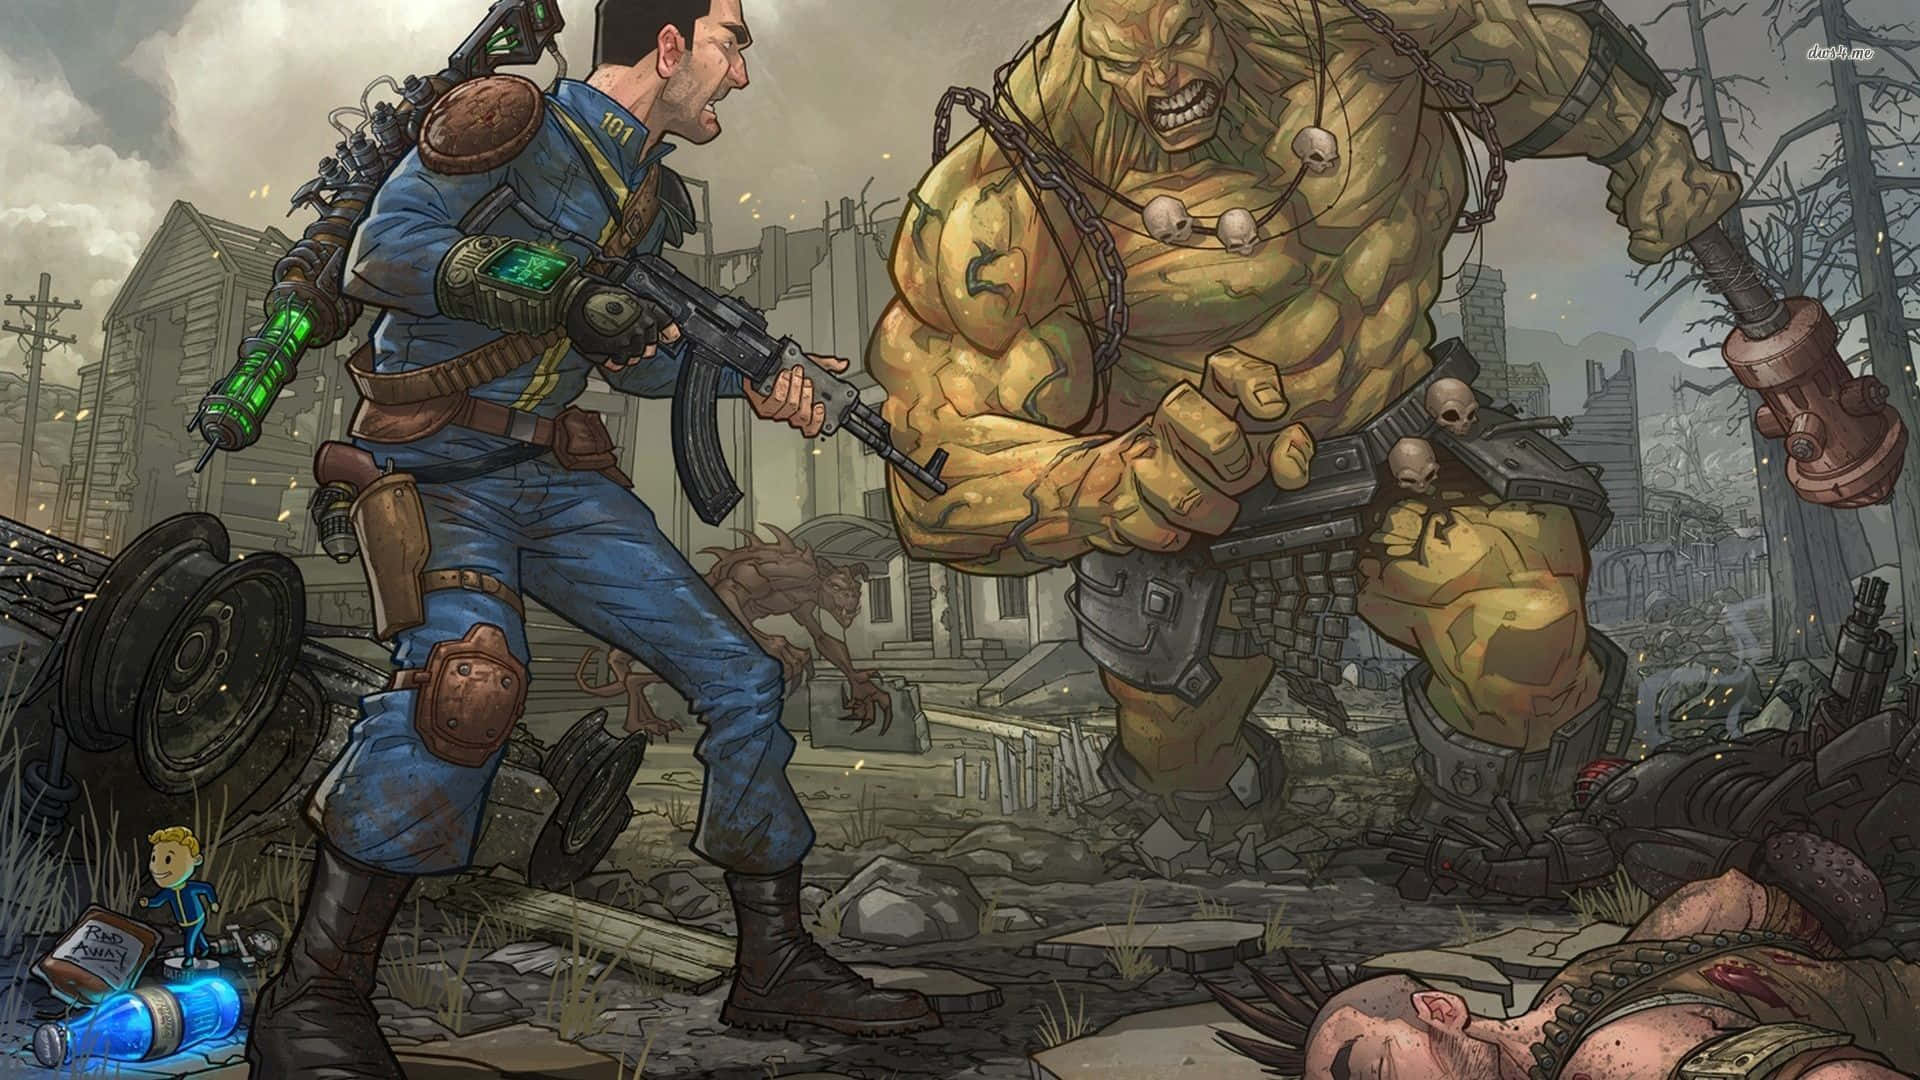 Fallout 4 - A Man With A Gun And A Zombie Wallpaper